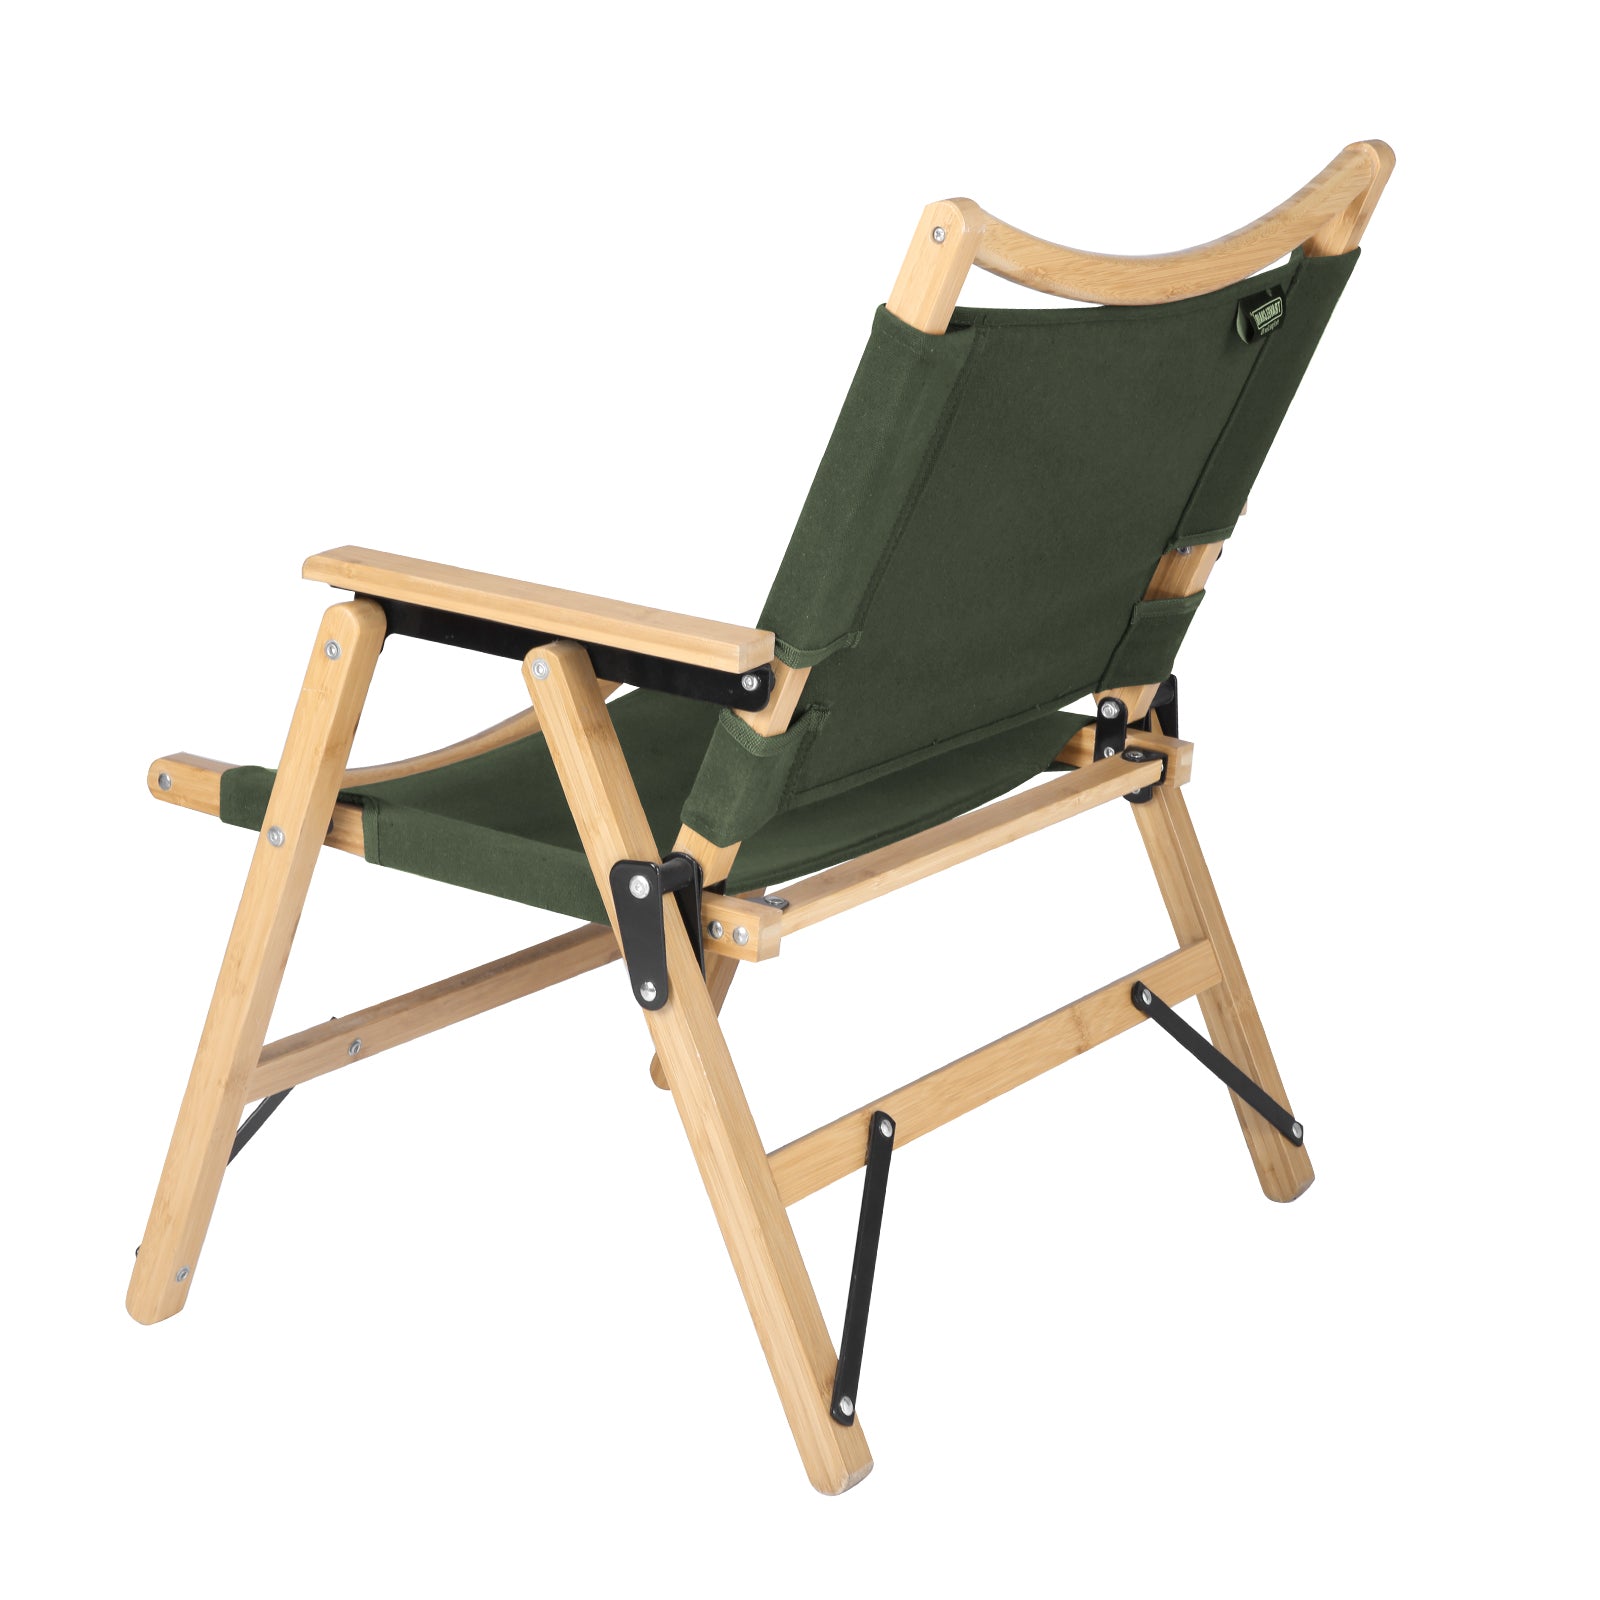 (Out of Stock) 2 Pack Foldable Portable Wooden Camping Chair for Adults Outdoor Leisure Chair with Storage Bag